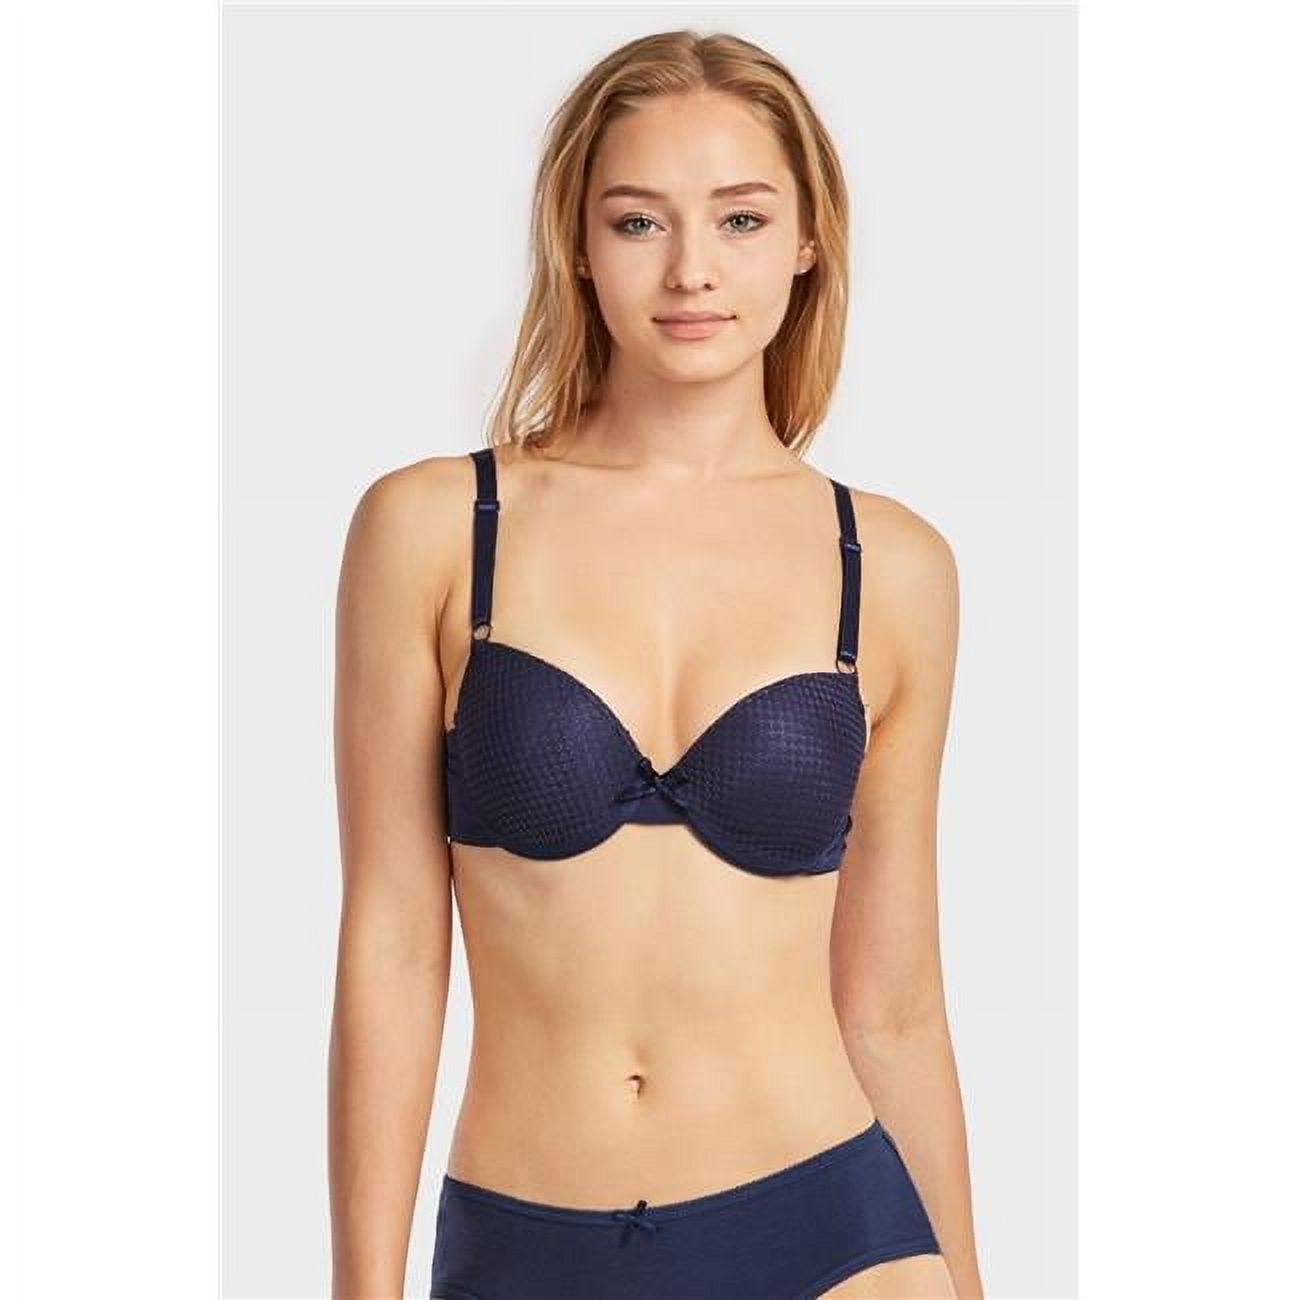 Mamia & Sofra IN-BR4324LPU-36C Lace Push Up Bra - Size 36C - Pack